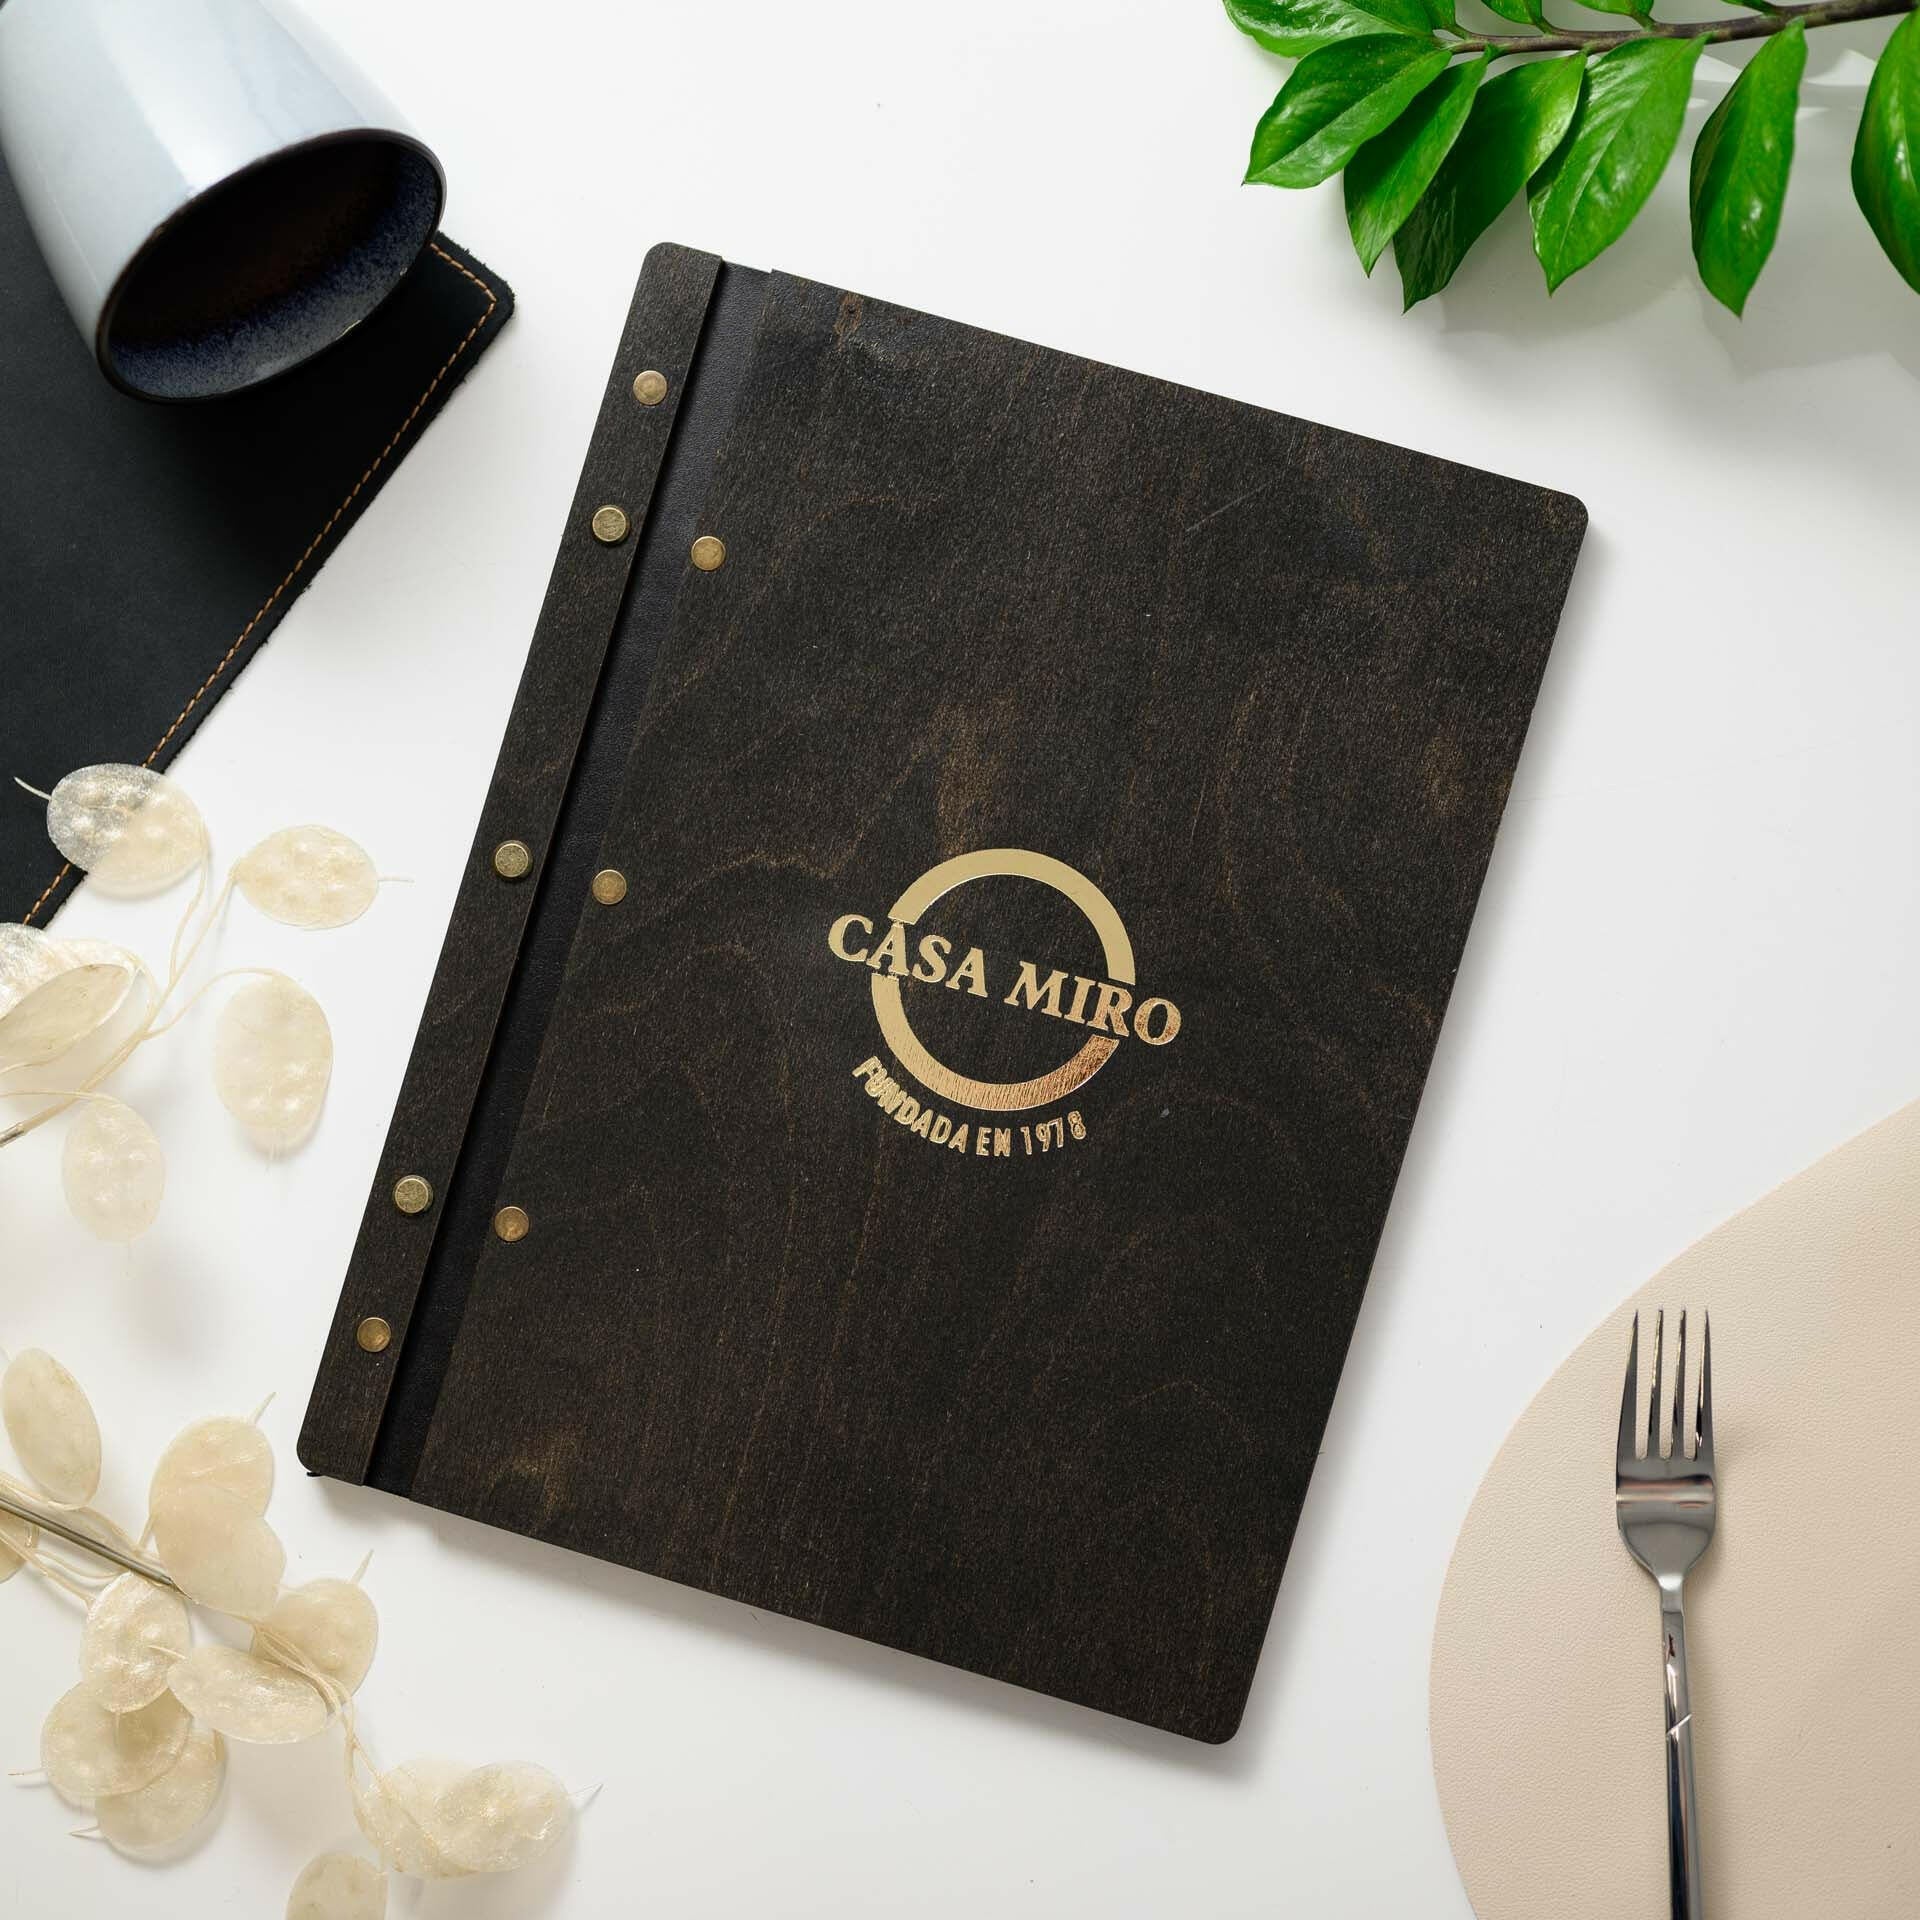 Restaurant Menu Folder: Keep menus organized and accessible for seamless dining experiences.